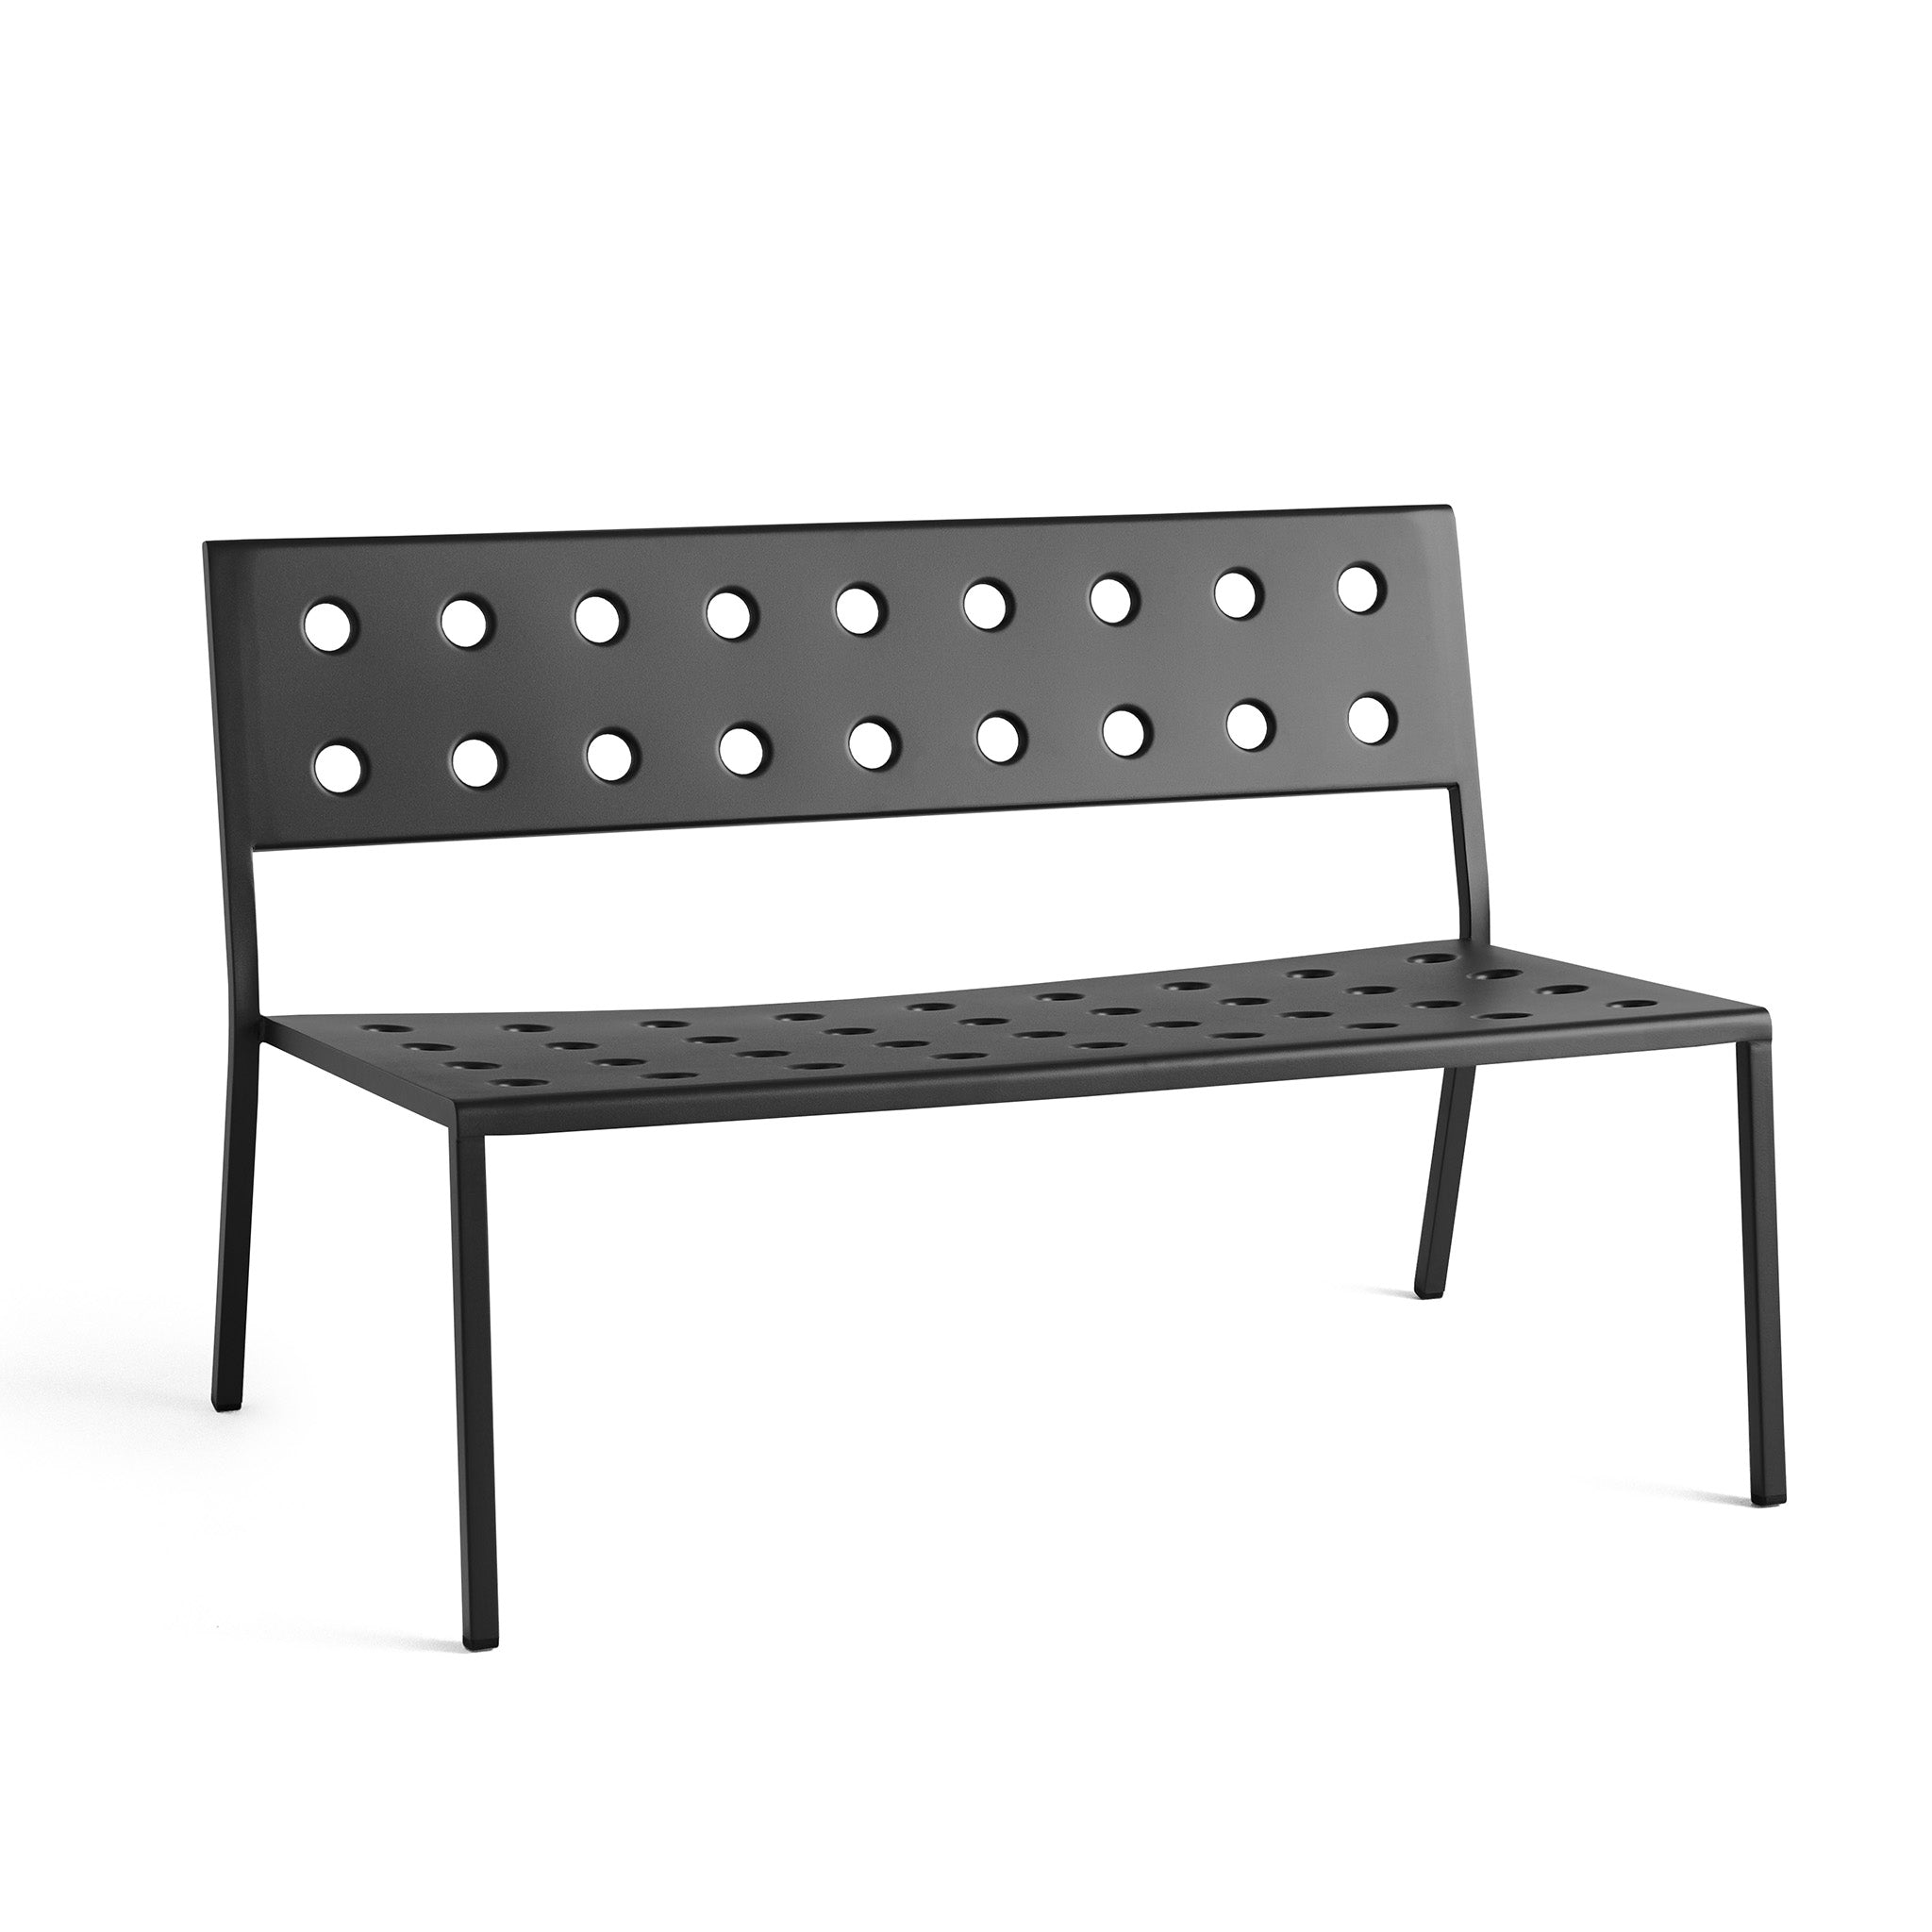 Balcony Lounge Bench By Ronan and Erwan Bouroullec for Hay